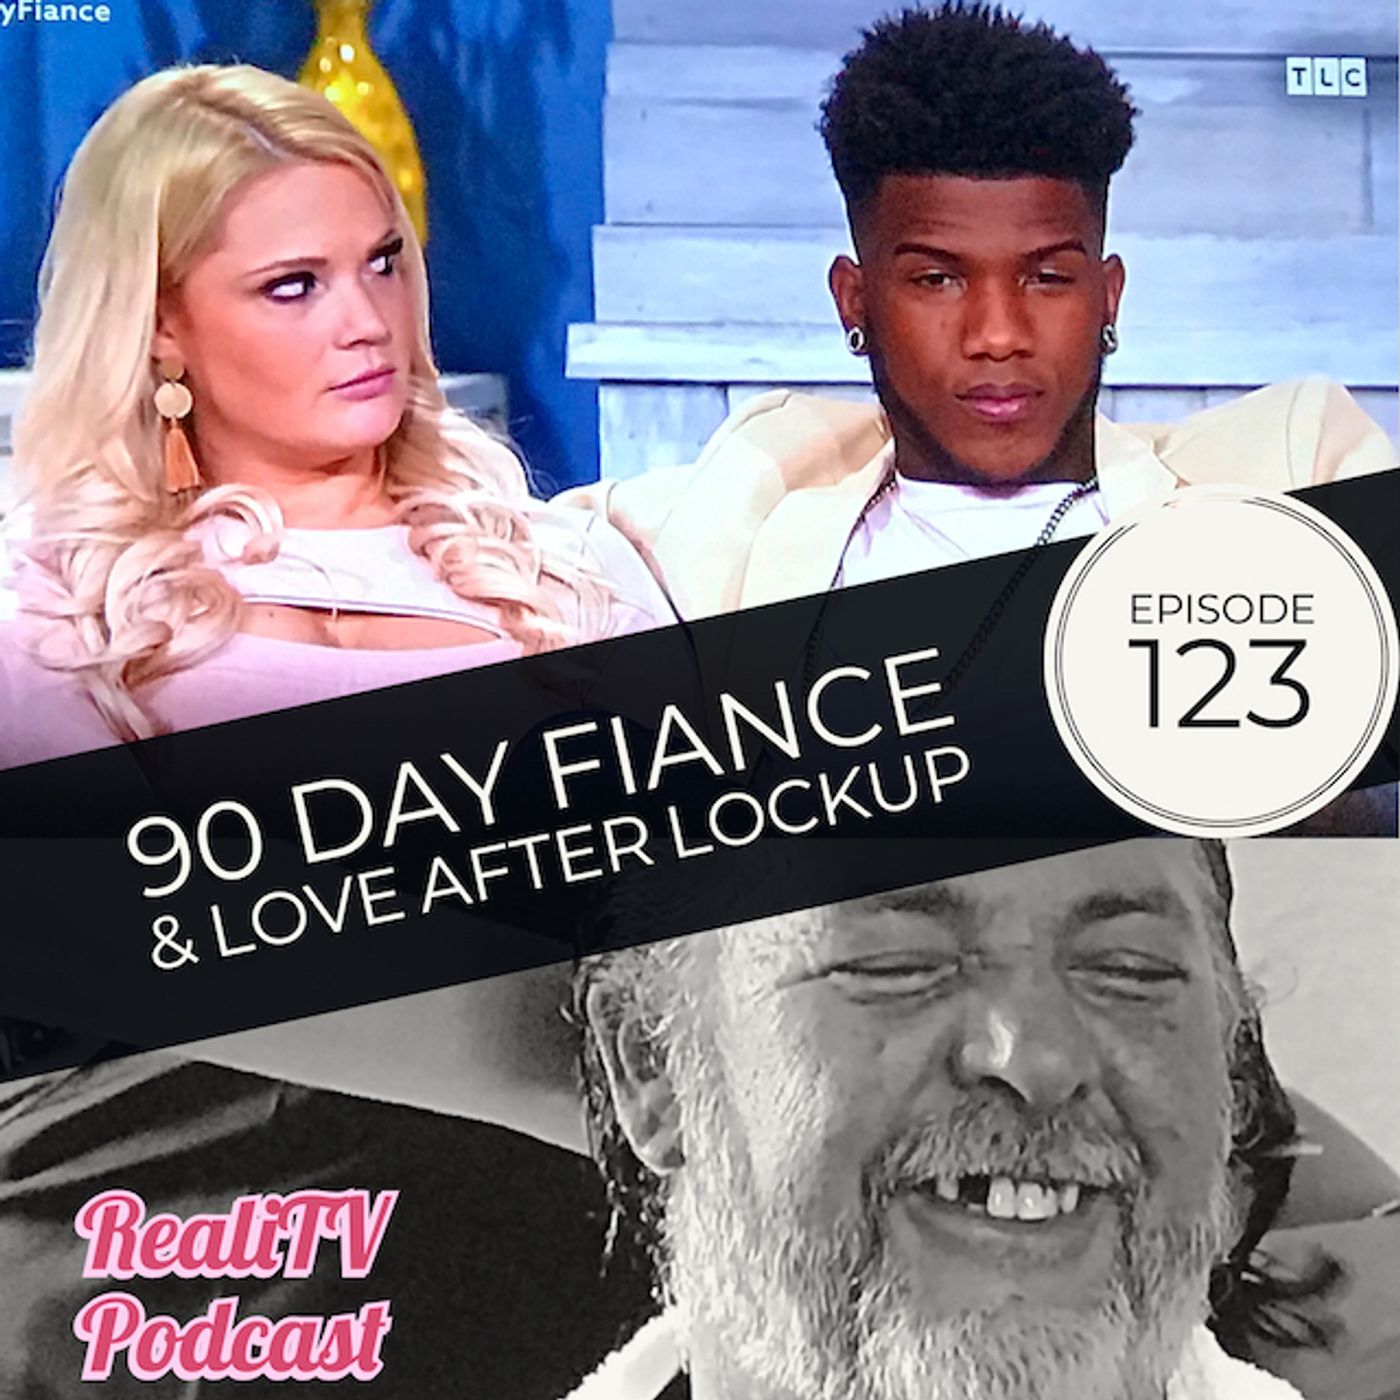 Episode 123: 90 Day Fiance Tell All & Love After Lockup